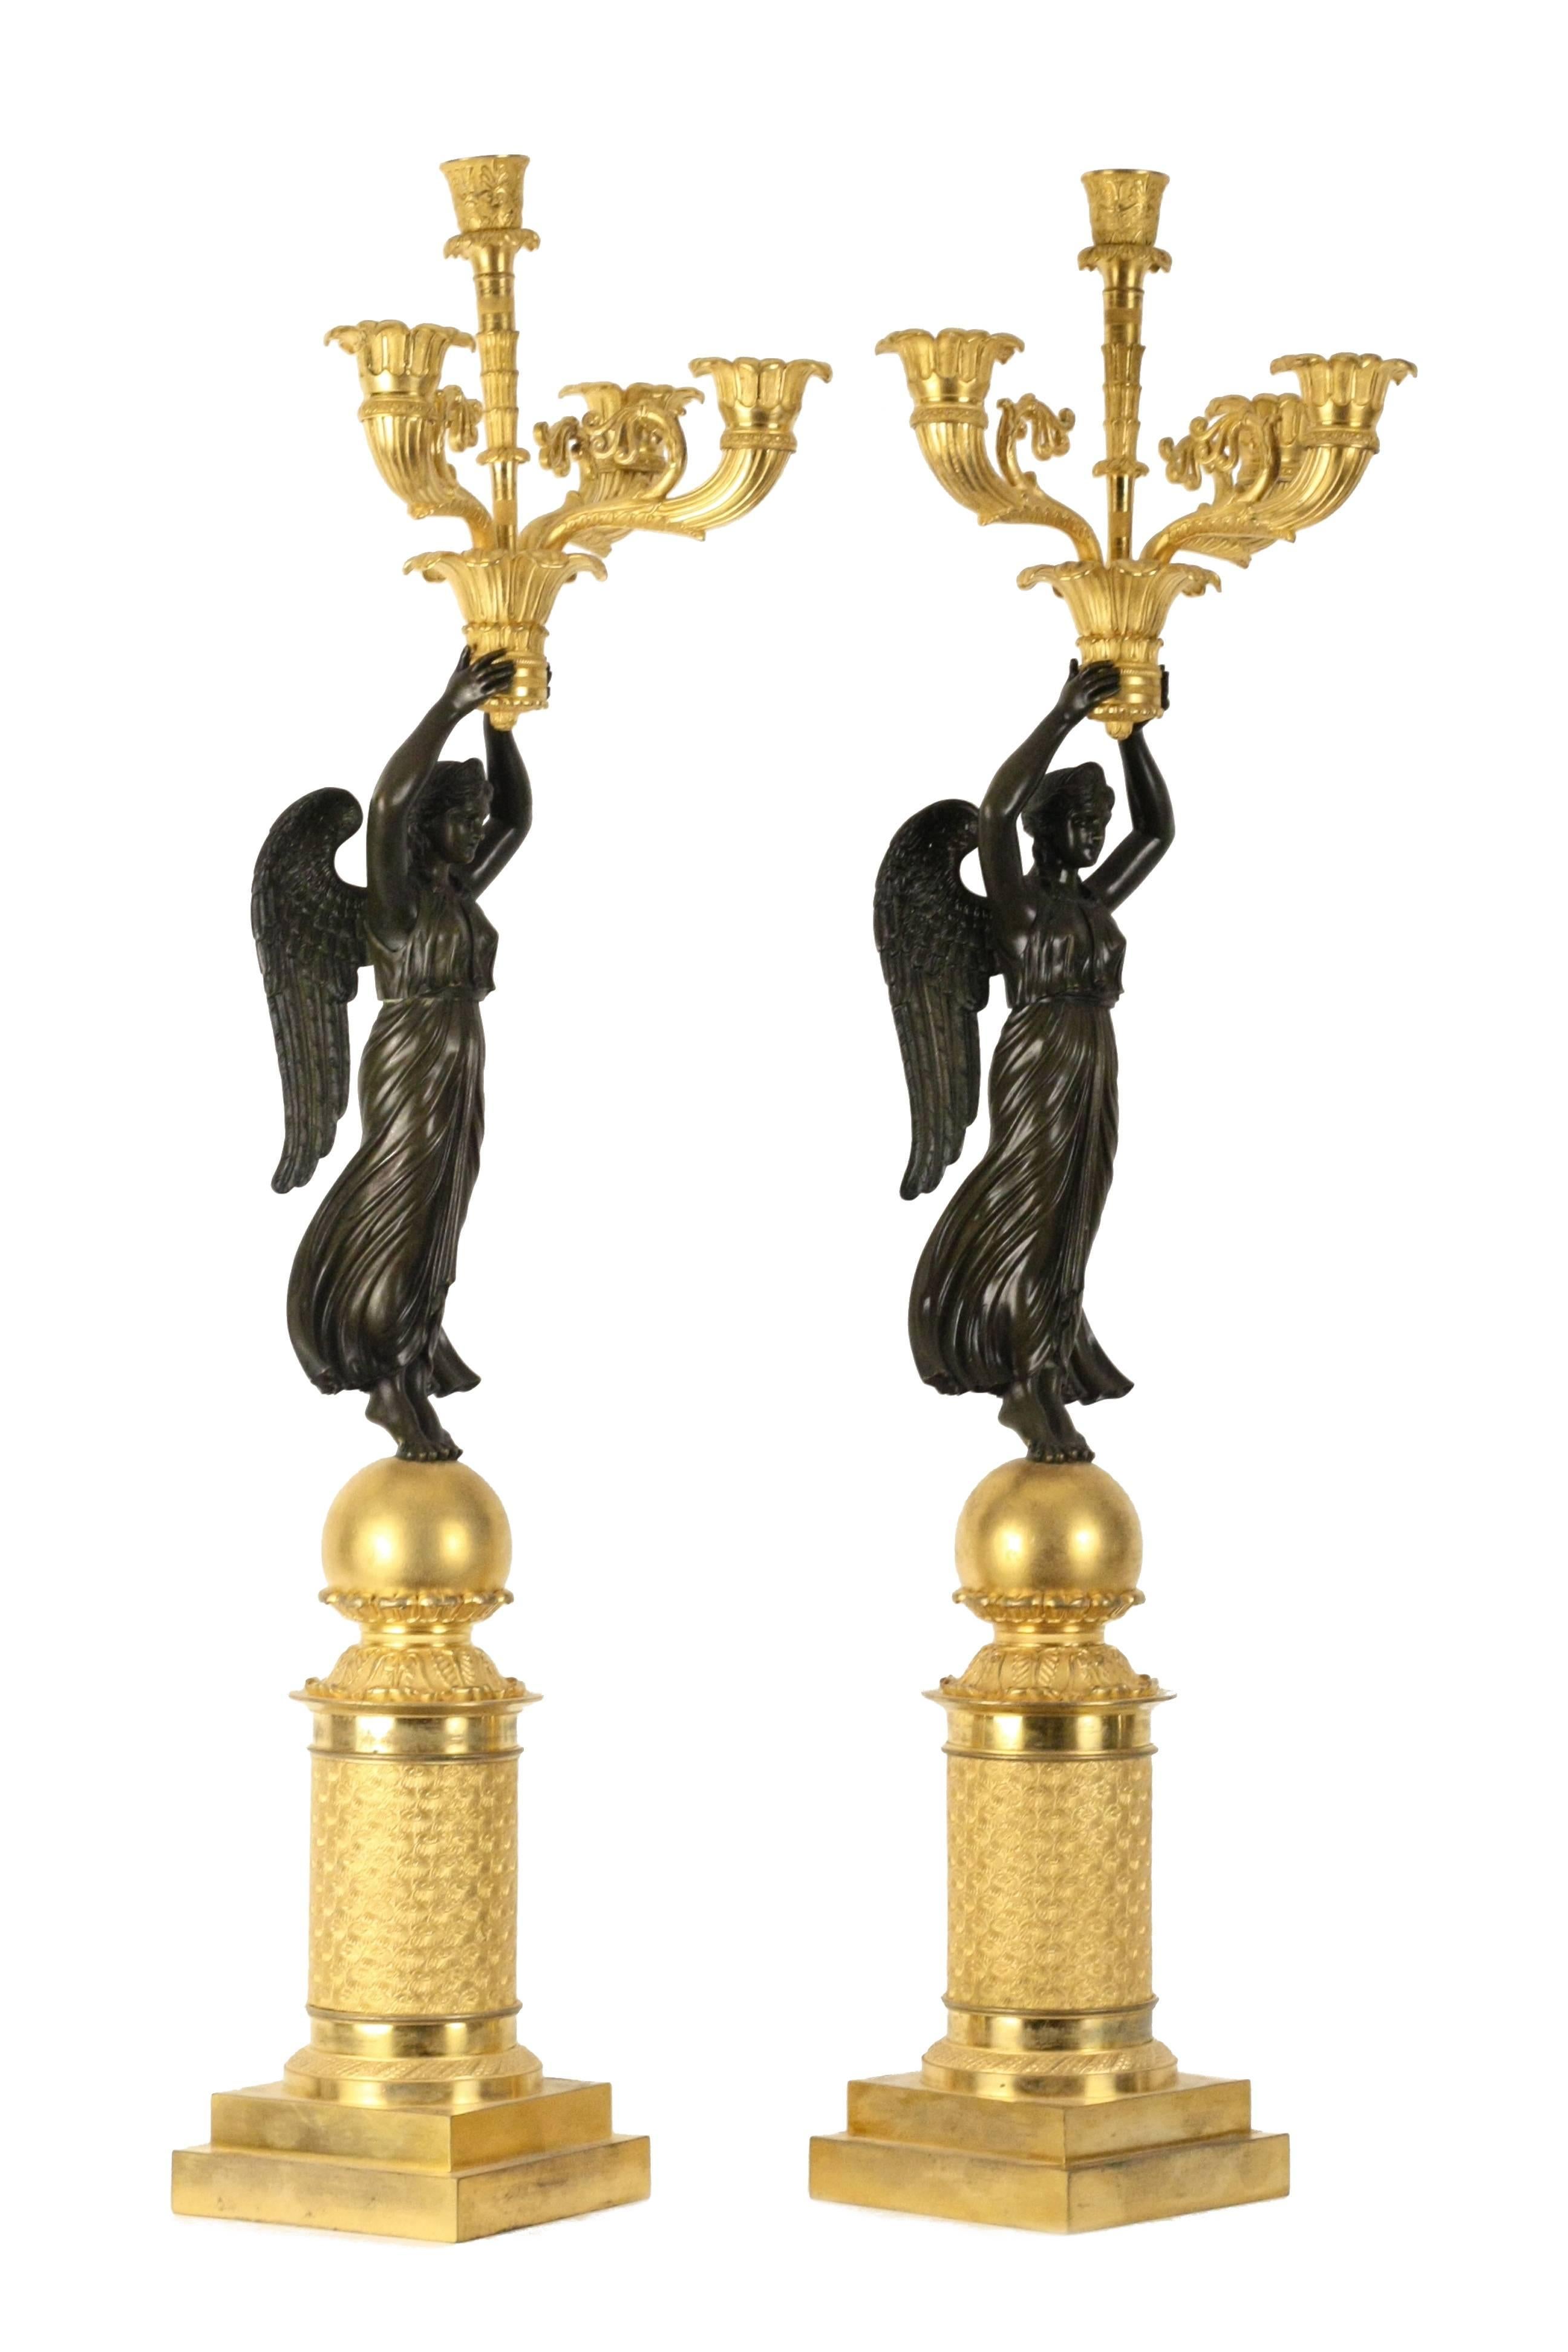 Pair of French Empire style gilt and patinated bronze four-light candelabra raised over the allegorical 'a la Victoire.' Highly detailed cast is in the distinct manner of Pierre Philippe Thomire (French, 1751-1843) after the original design by